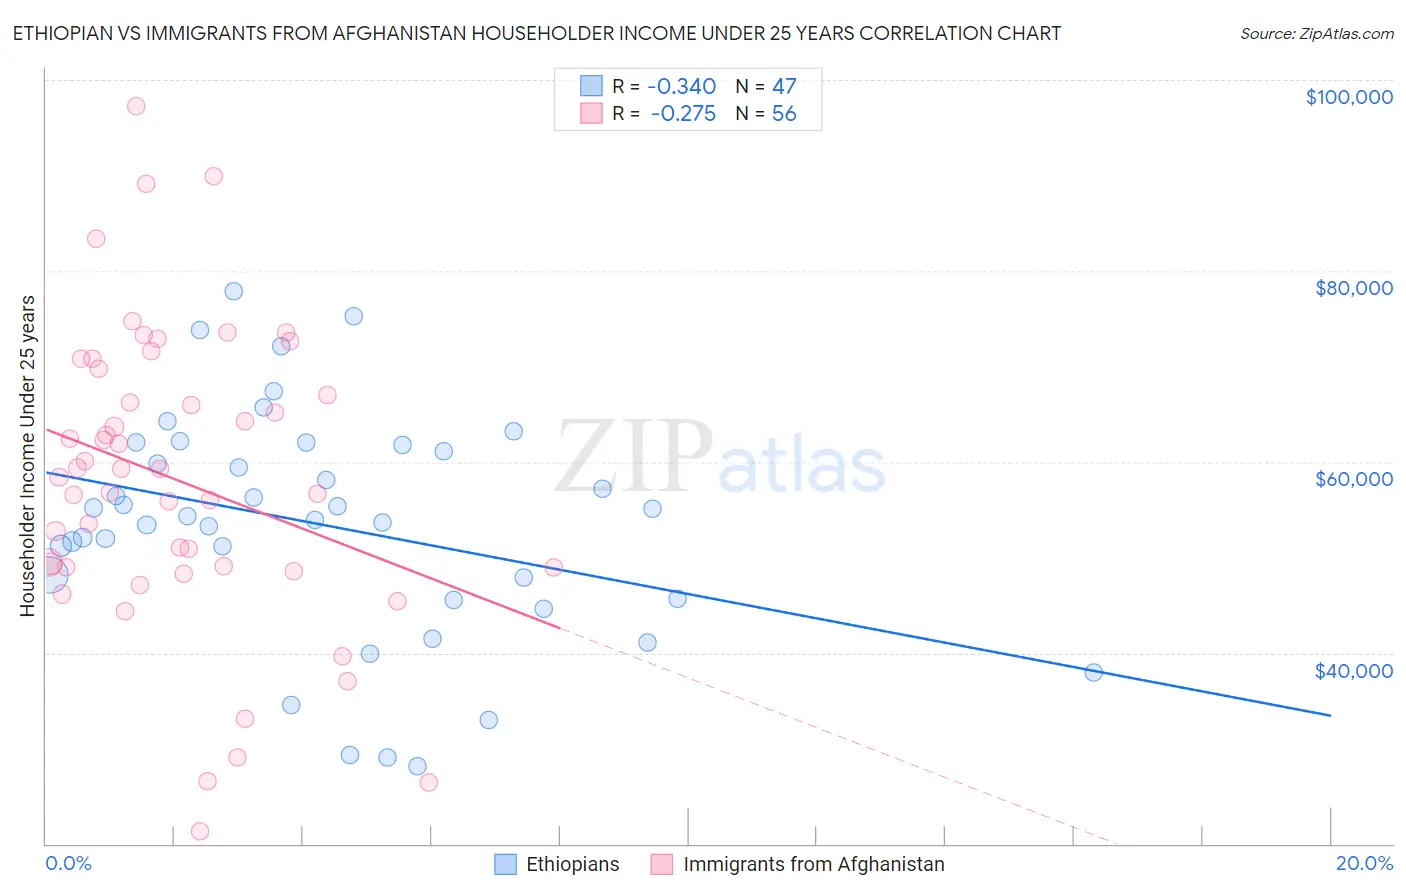 Ethiopian vs Immigrants from Afghanistan Householder Income Under 25 years